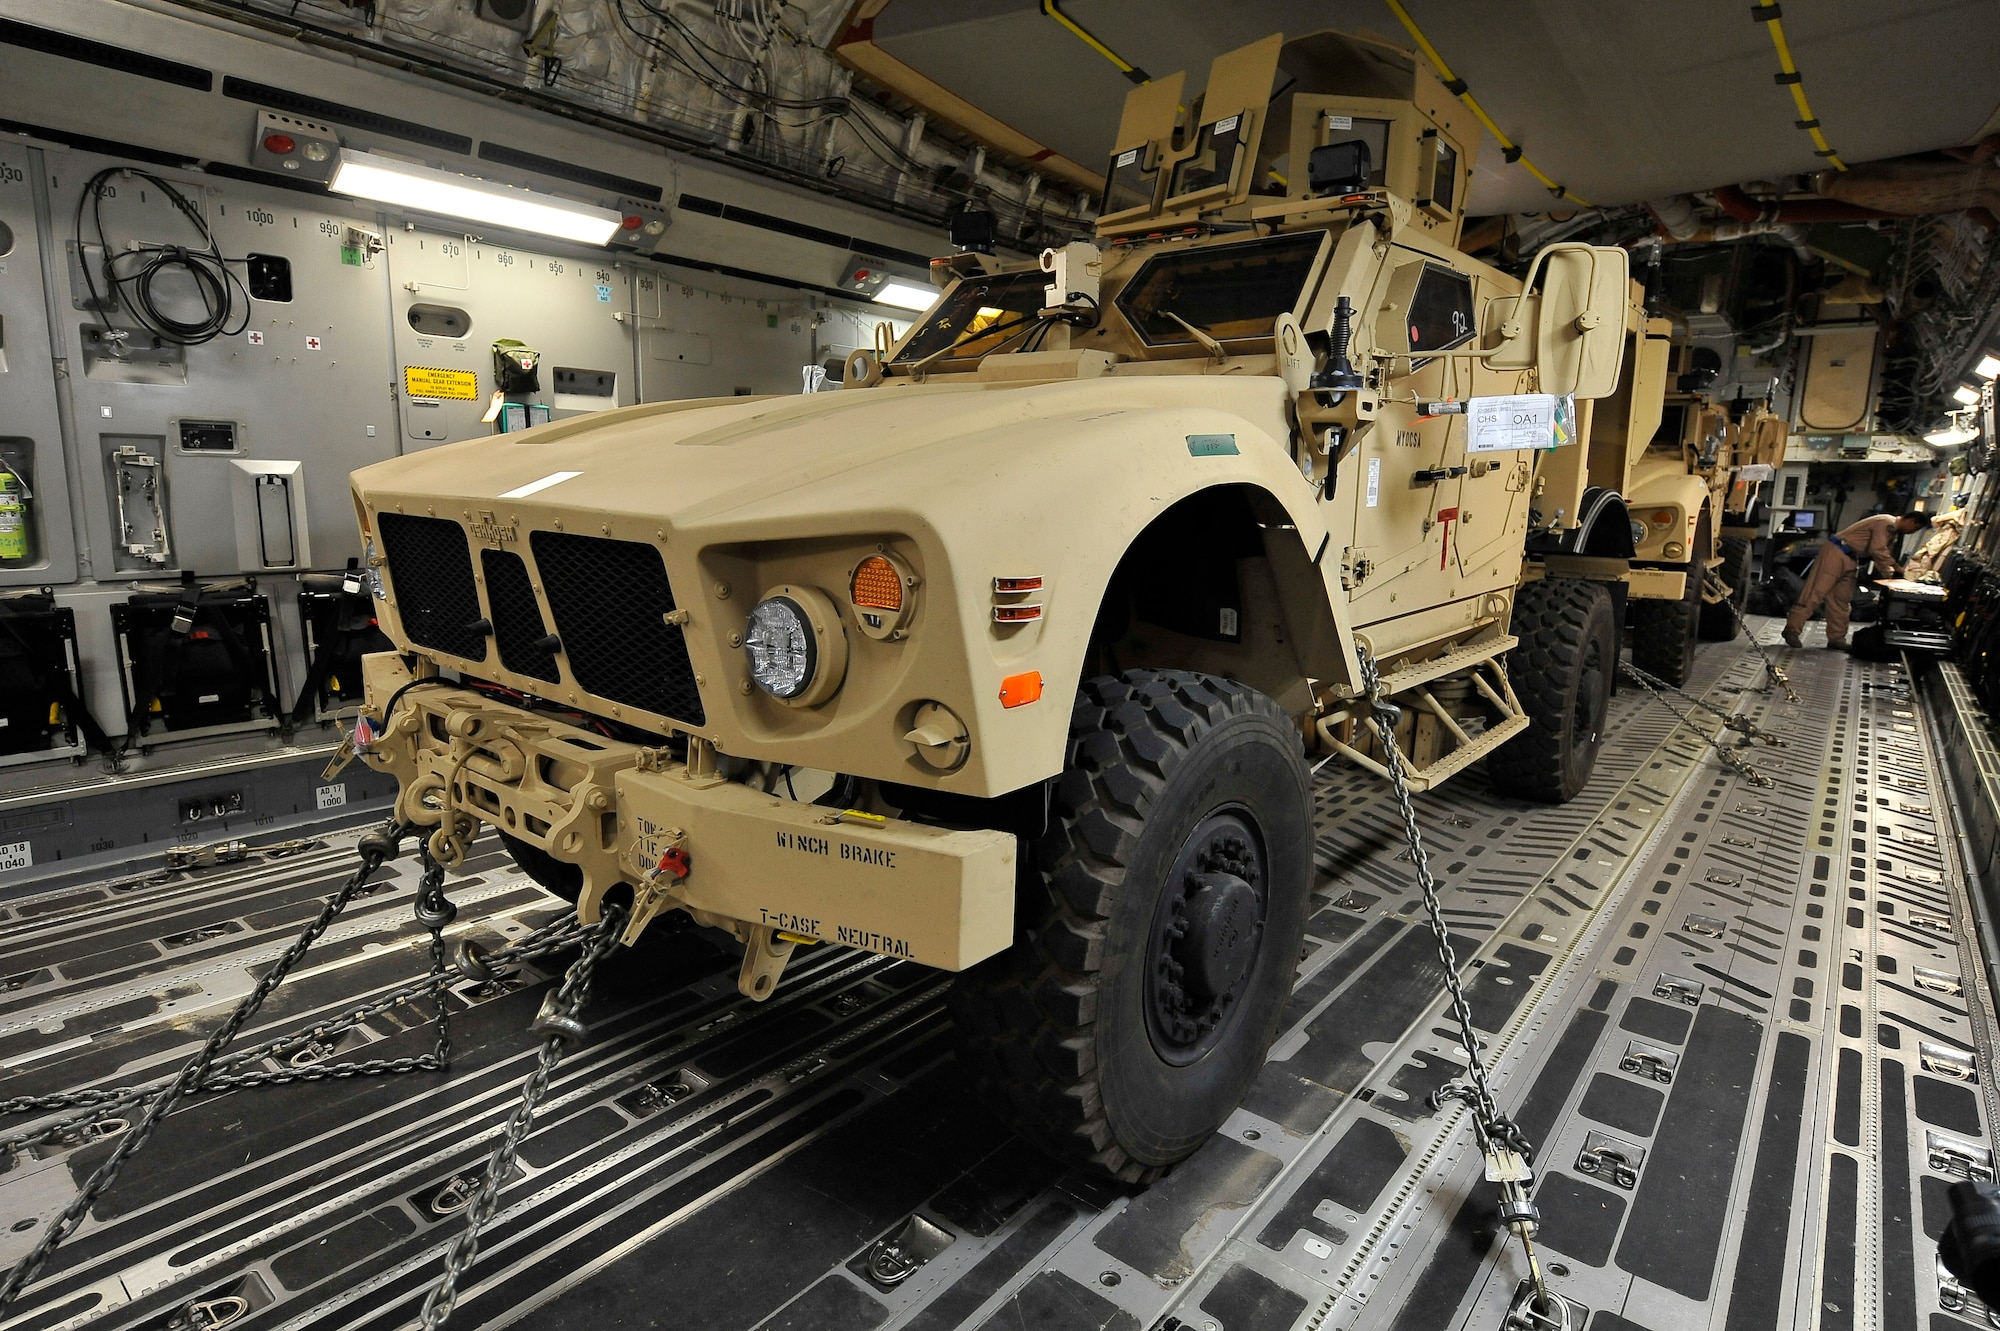 Two mine-resistant, ambush-protected all-terrain vehicles, or M-ATVs, await transport on a C-17 Globemaster III at Charleston Air Force Base, S.C., Sept. 30, 2009.  The two M-ATVs are the first to be delivered to the Afghanistan theater for operational use. The C-17 is based out of McChord AFB, Wash. (U.S. Air Force photo/James M. Bowman)